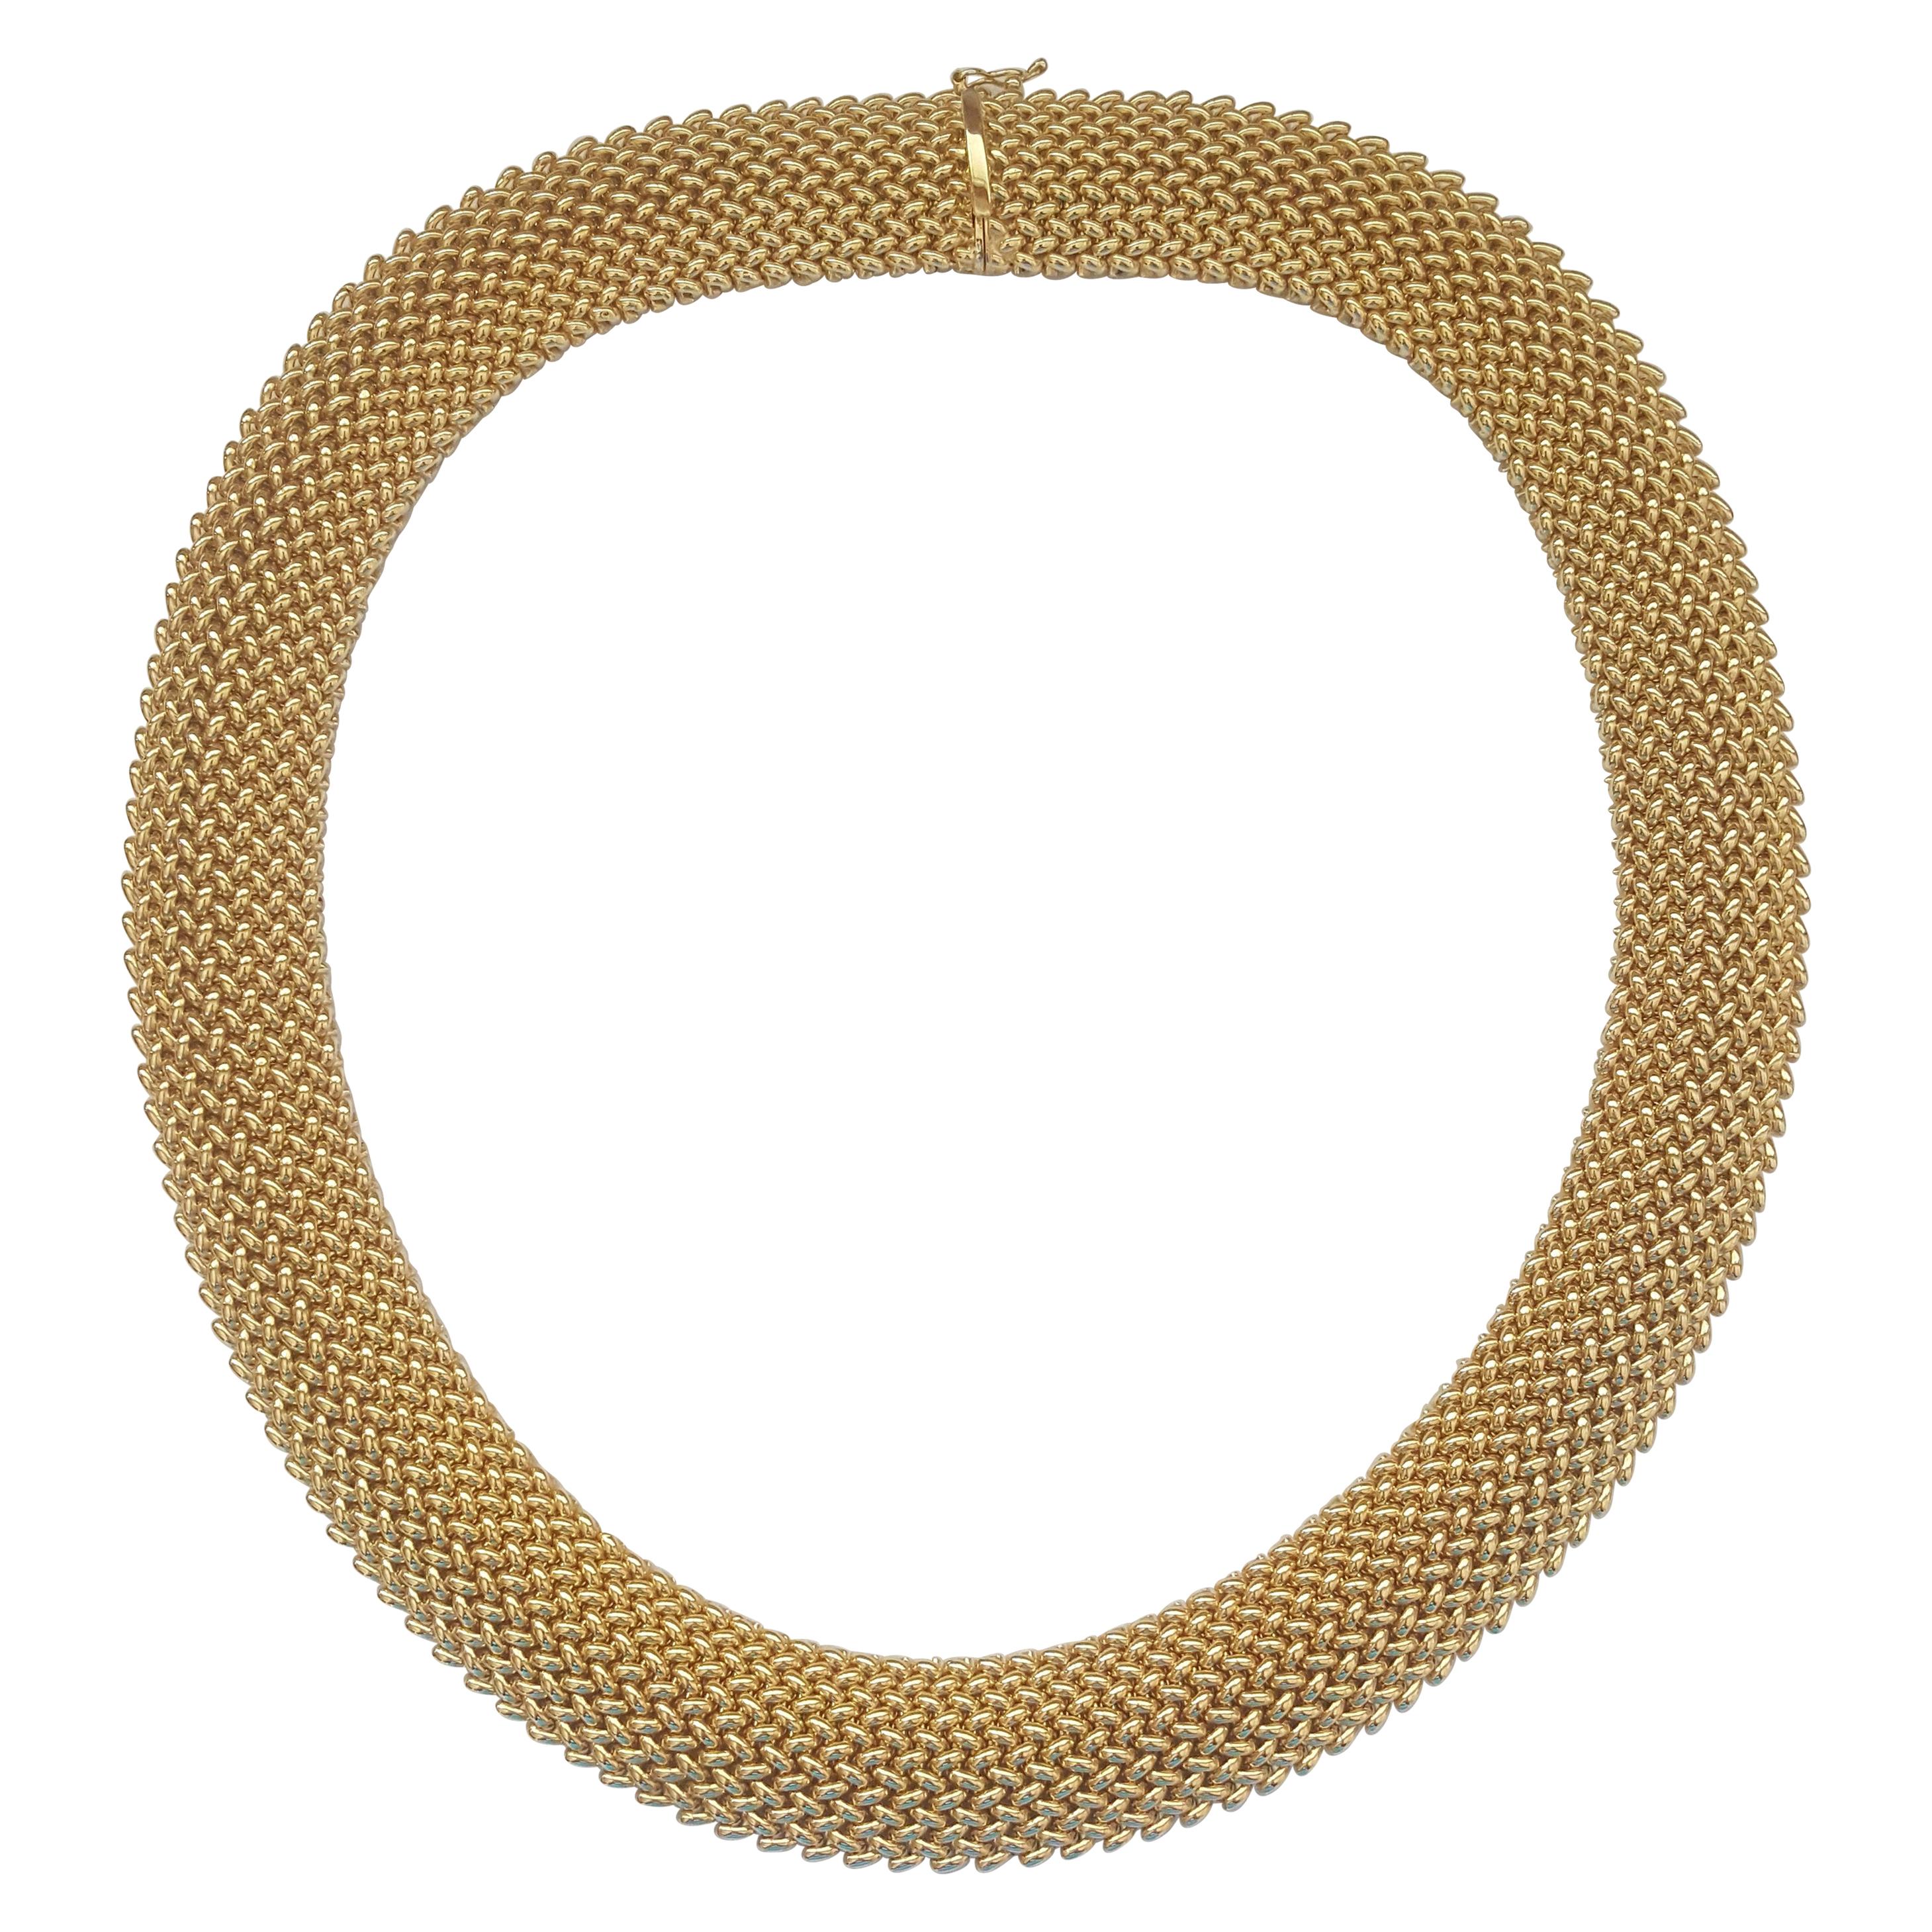 14 Karat Yellow Gold Omega Style Necklace with a Mesh Design